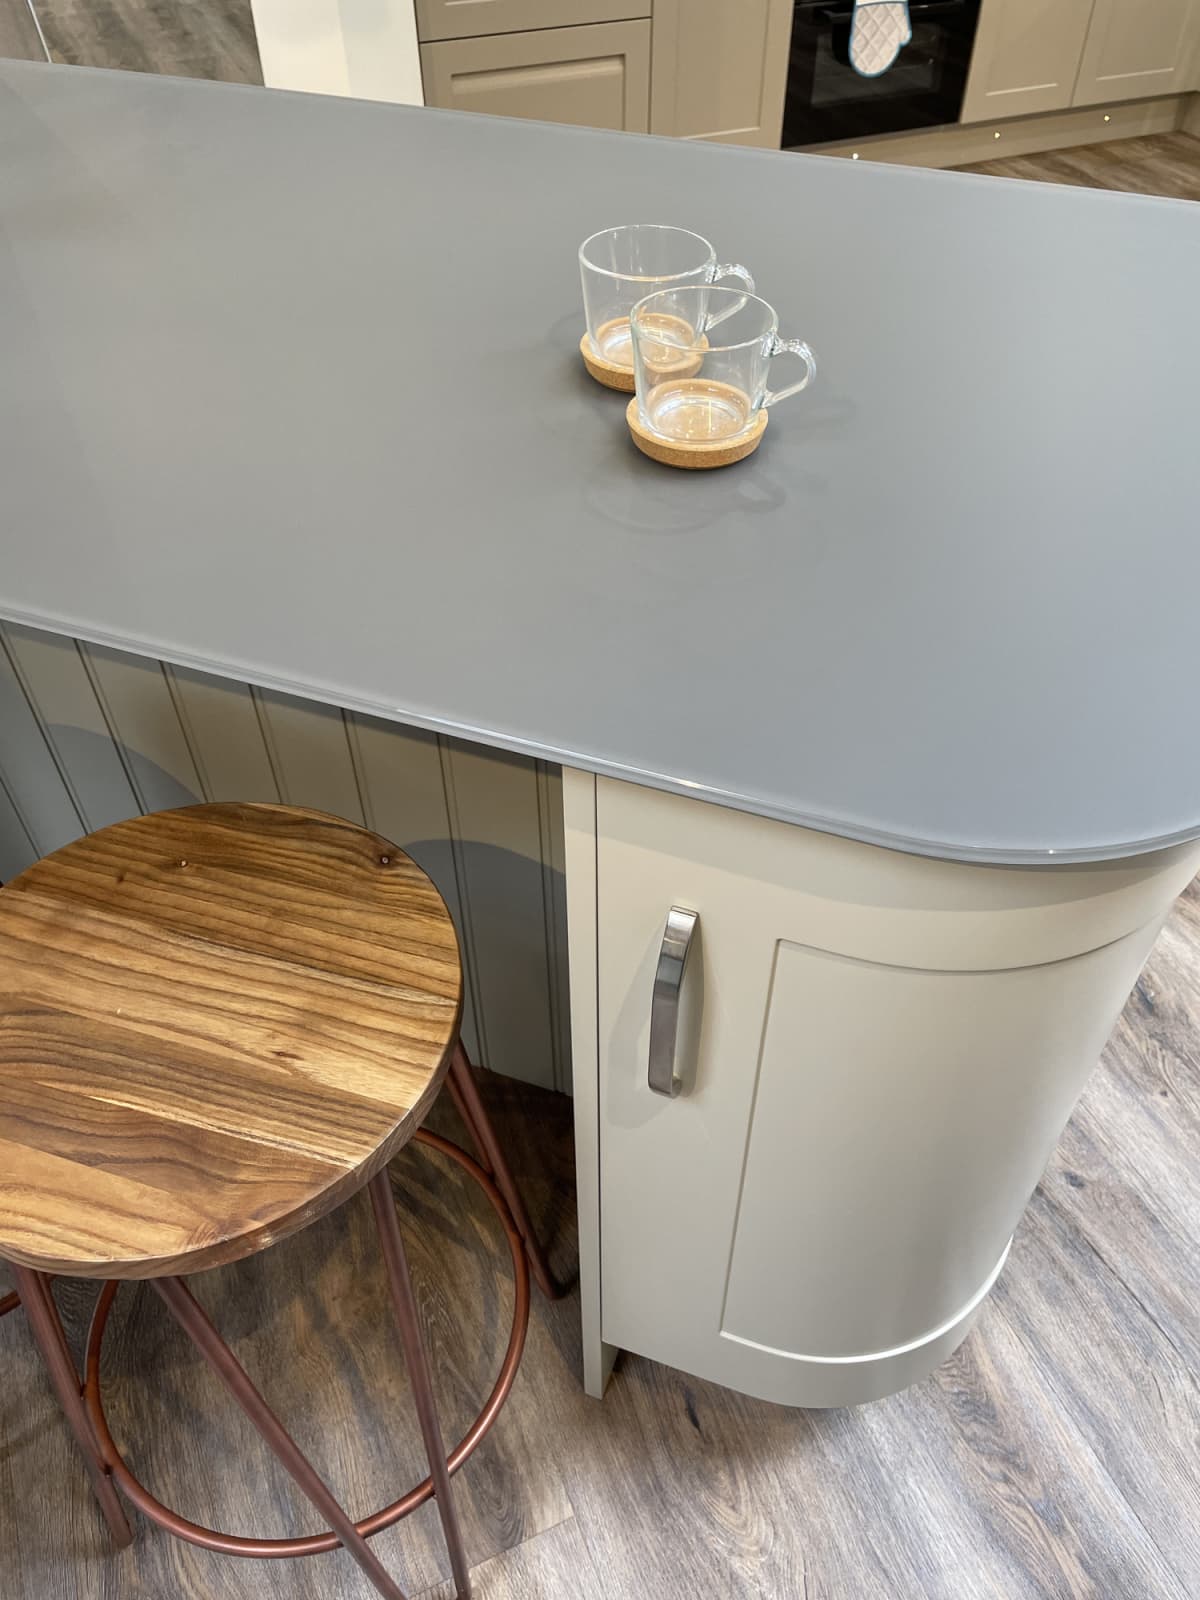 Stock photo showing curved breakfast bar cabinets painted duck egg blue with tongue and groove cladding timber and grey composite corian countertop, An oak wood stool with copper coloured metal legs can be seen on the dark oak effect laminate flooring.